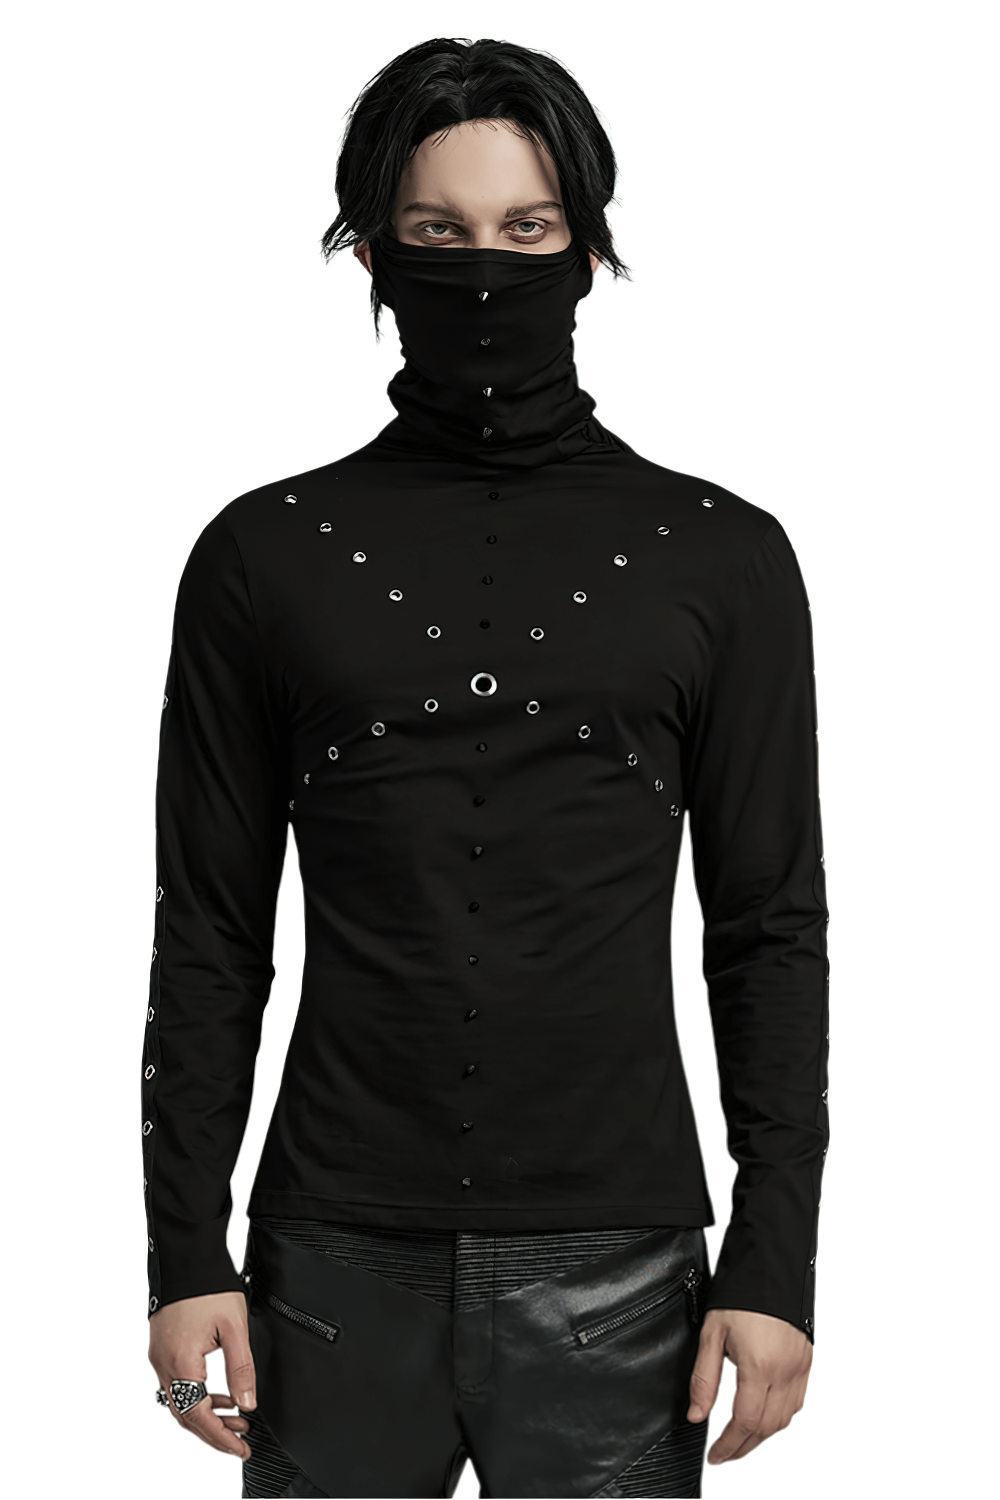 Punk Men's High Collar Top with Spiked Details